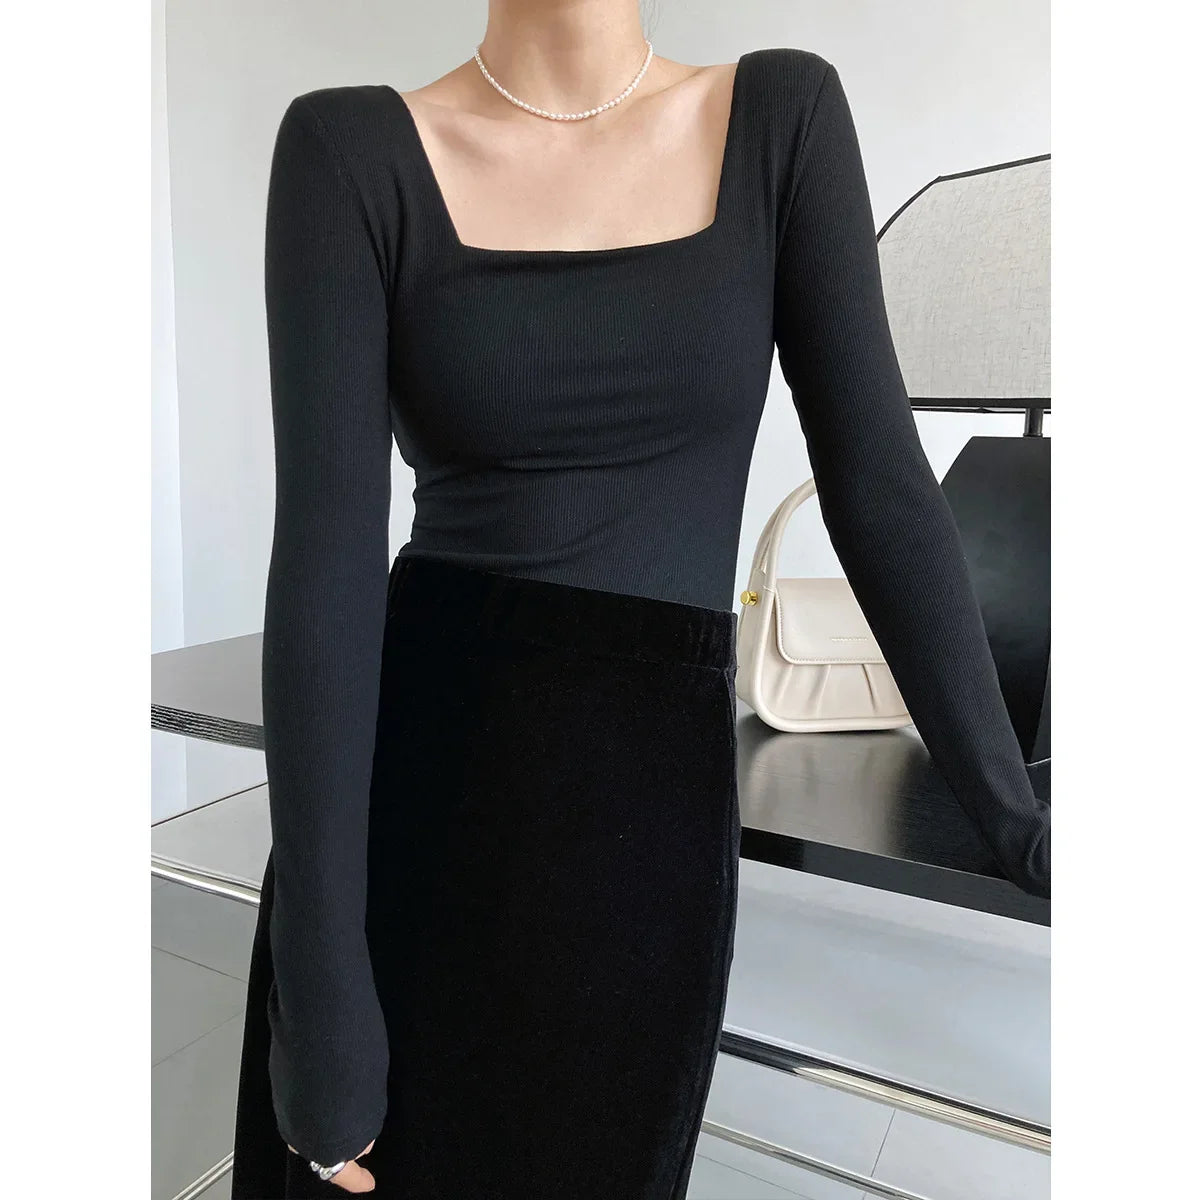 Women's Long-Sleeve Stretchy T-Shirt Square-Neck Slim-Fit Exposed Collarbone Low-Neck Shirt